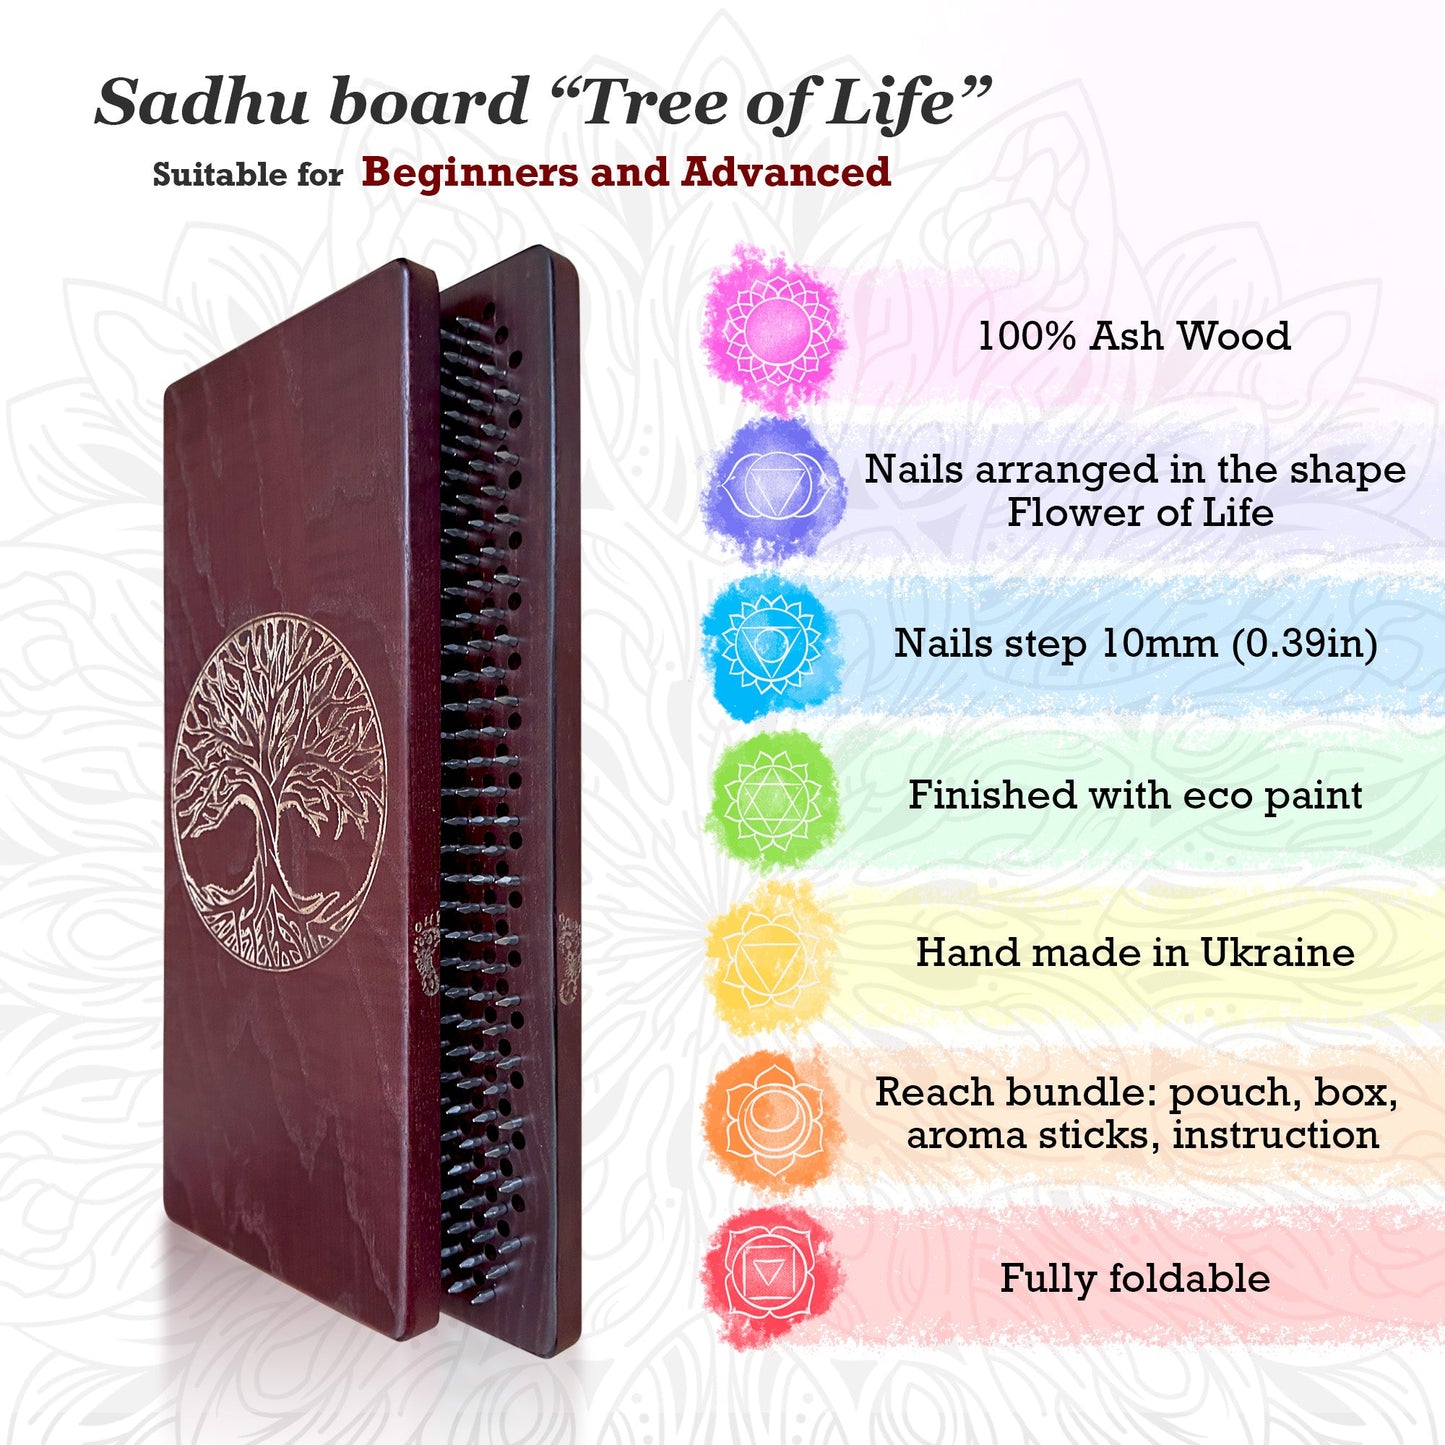 Features of Oh! Sadhu board nails